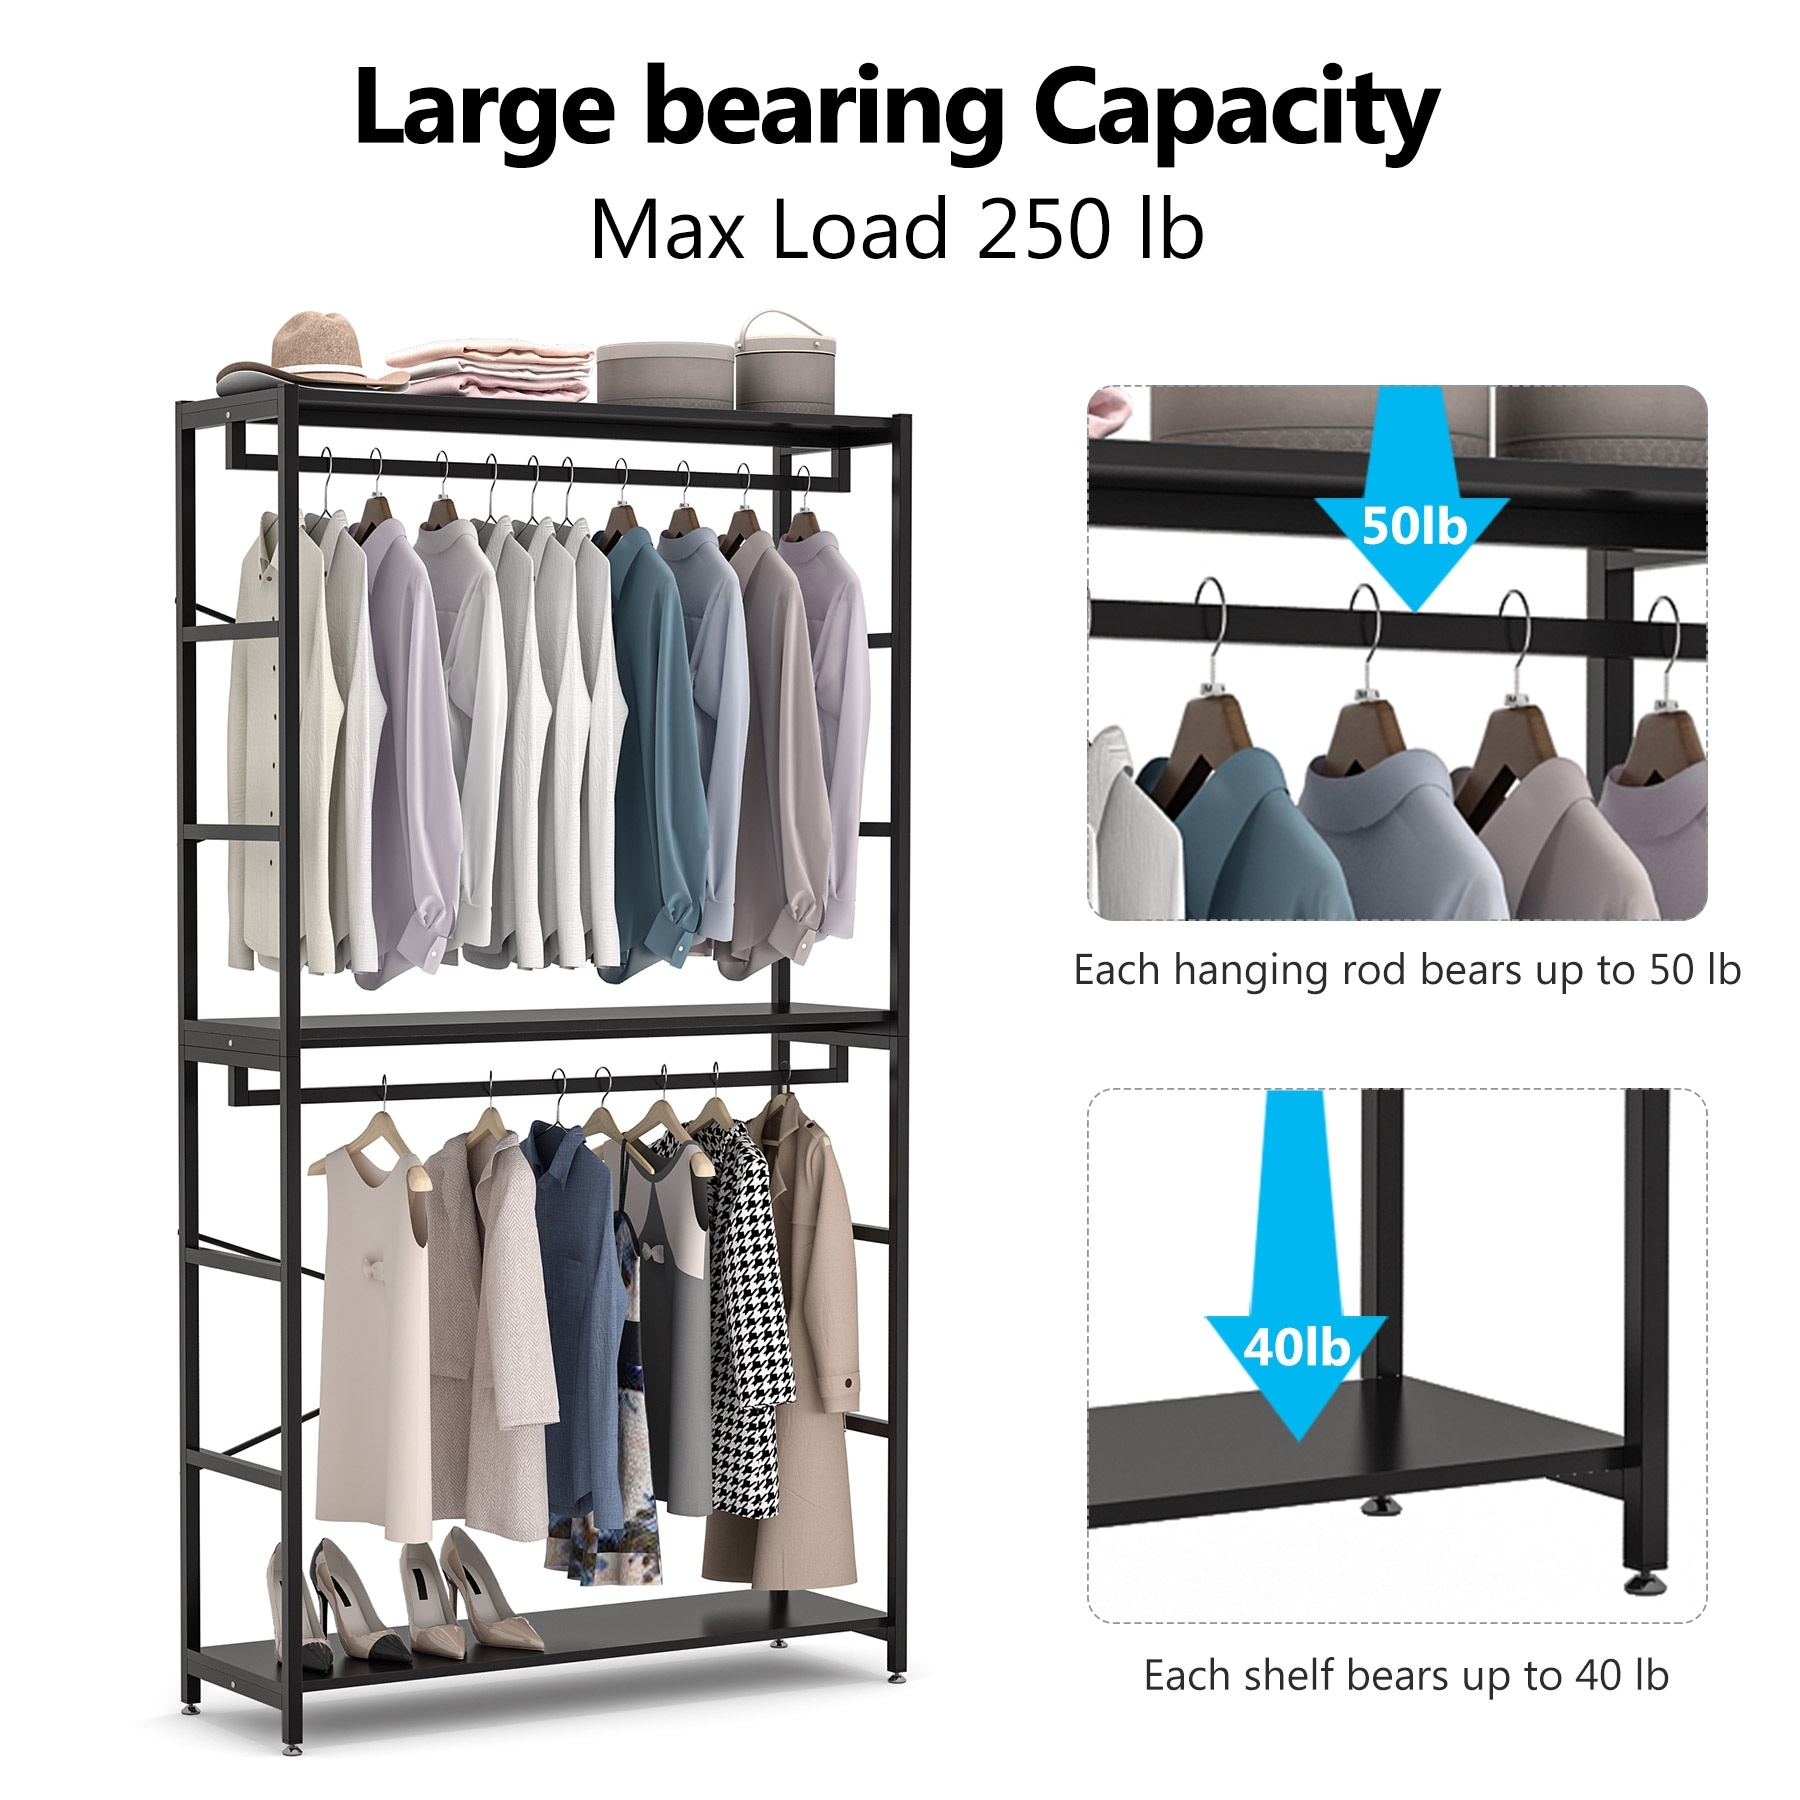 https://ak1.ostkcdn.com/images/products/is/images/direct/e60576e2fba7f328e256026be9ad5ebdf7544f2a/Extra-tall-47-inches-Double-Rod-Closet-Shelf-Freestanding-3-Shelves-Clothes-Clothing-Garment-Racks.jpg